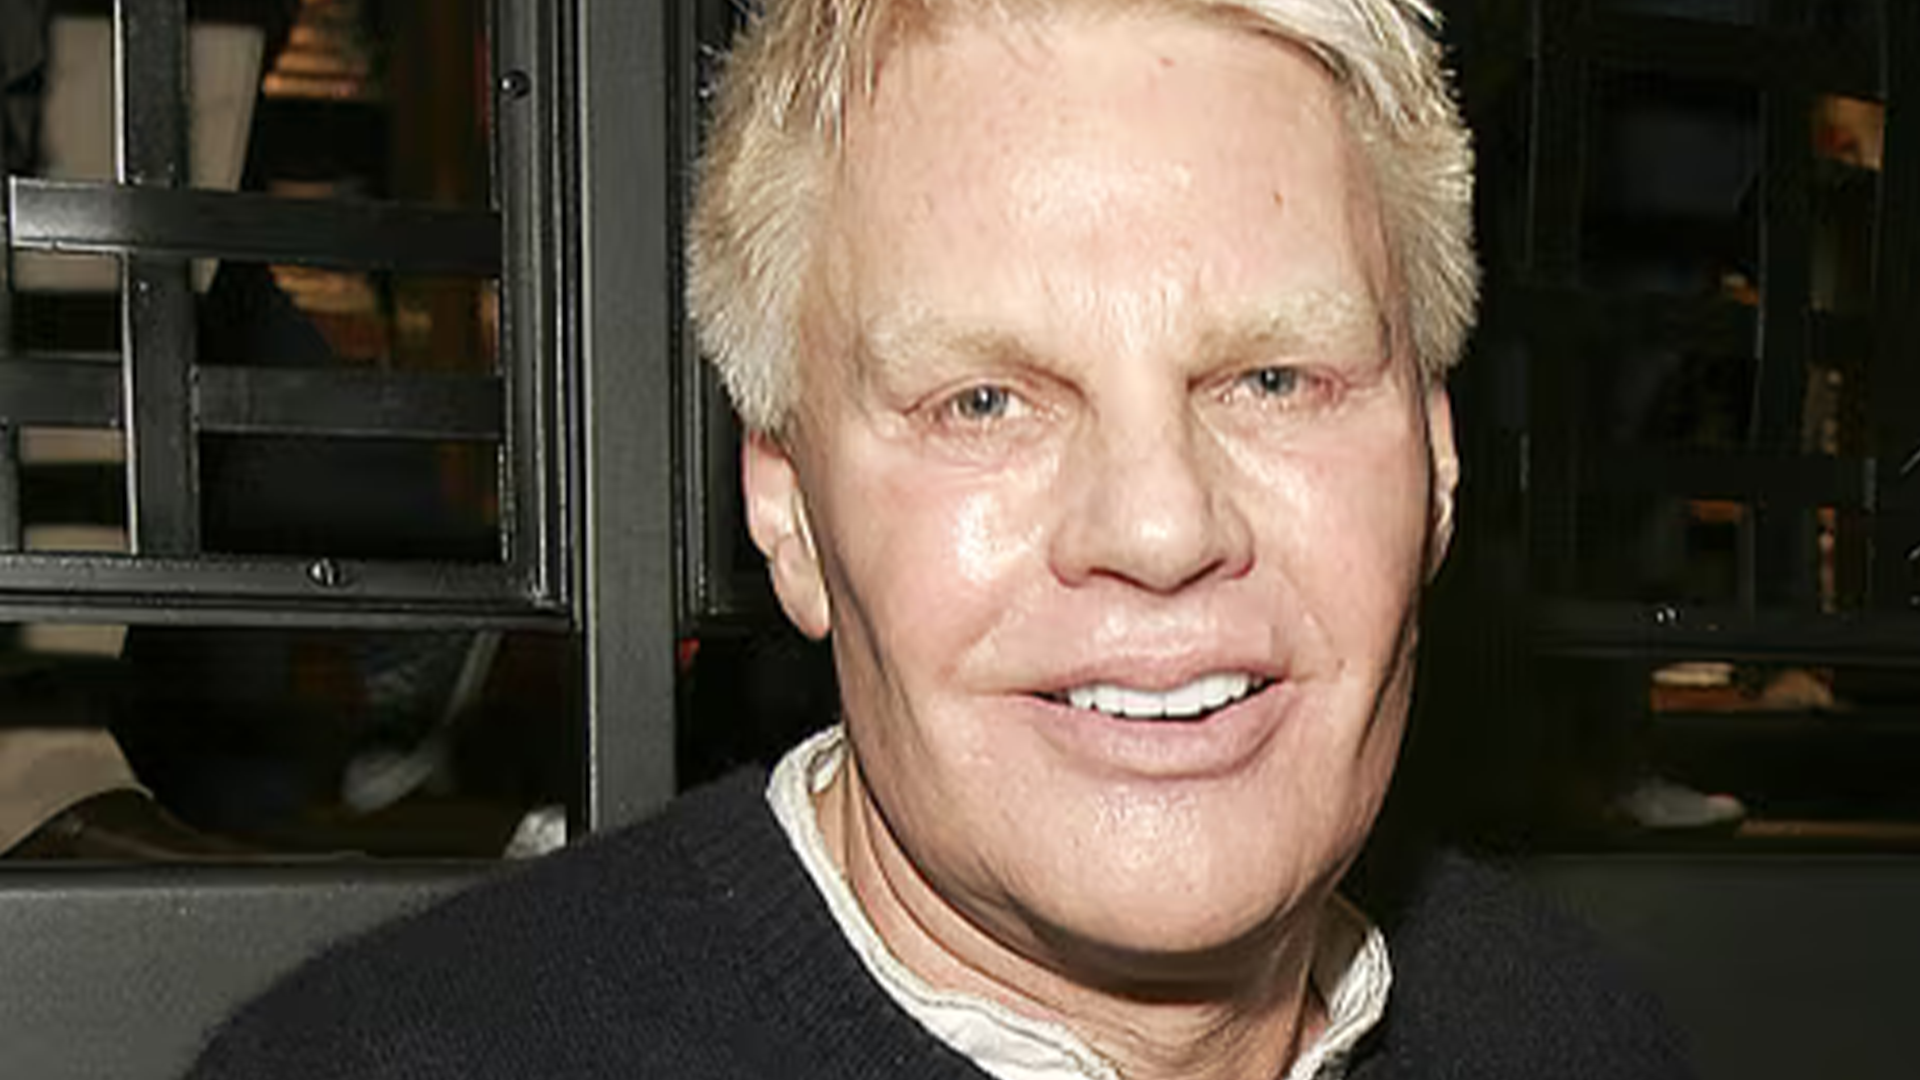 Abercrombie & Fitch ex-CEO Mike Jeffries